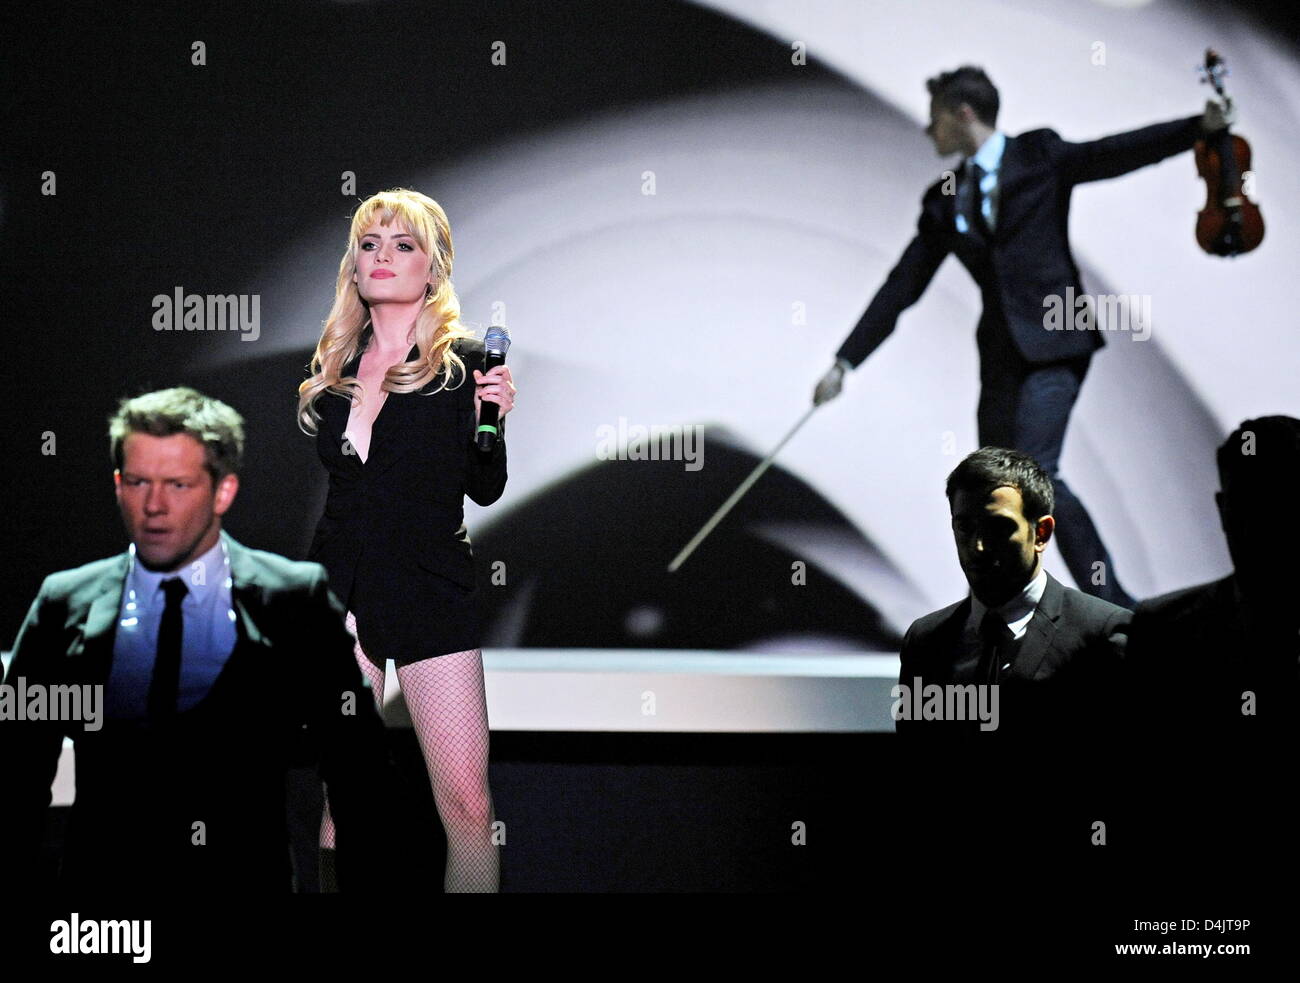 Welsh singer Duffy (2-L) performs at the German television show ?Wetten, dass...?? (?Bet that...??) in Duesseldorf, Germany, 28 February 2009. Photo: Clemens Bilan Stock Photo